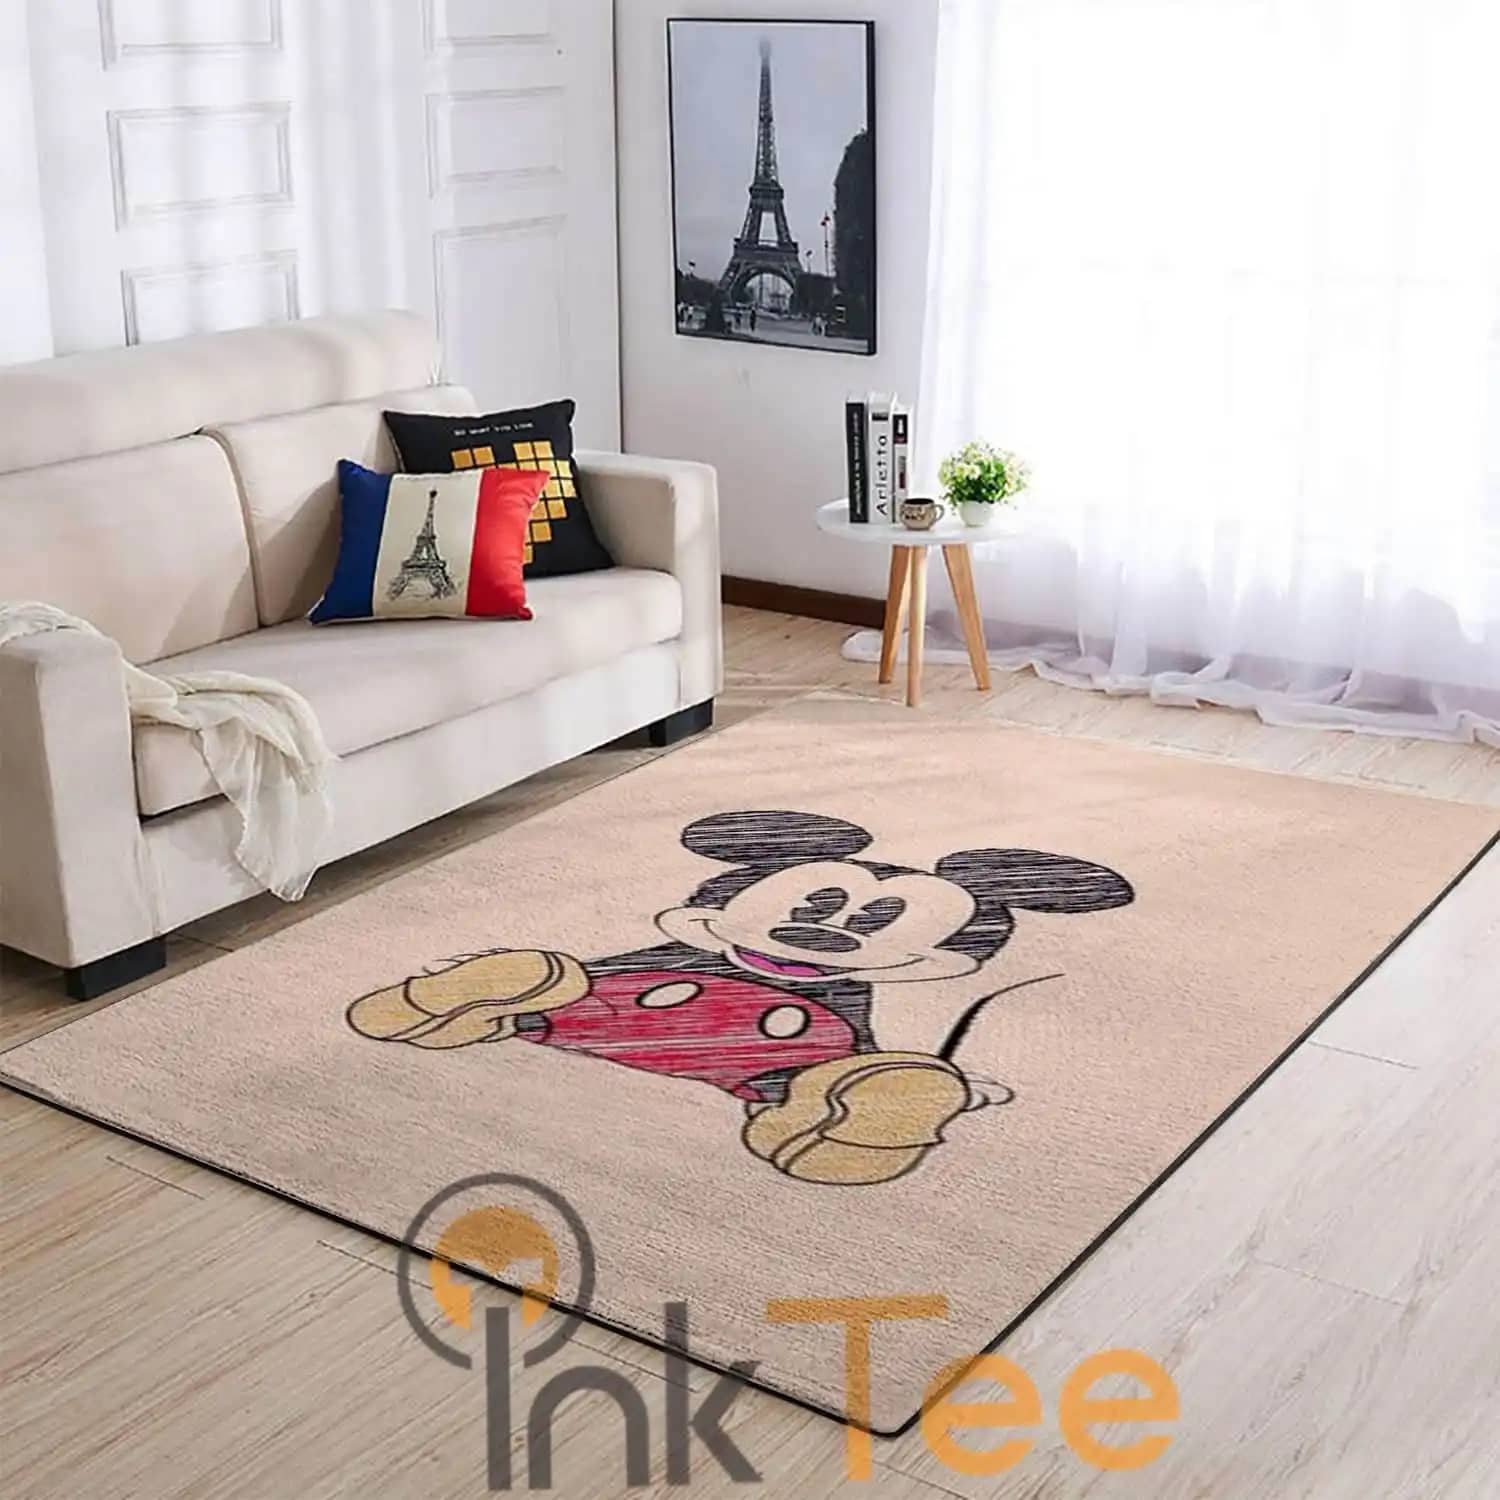 Mickey Mouse Living Room Area Amazon Best Seller 4106 Rug